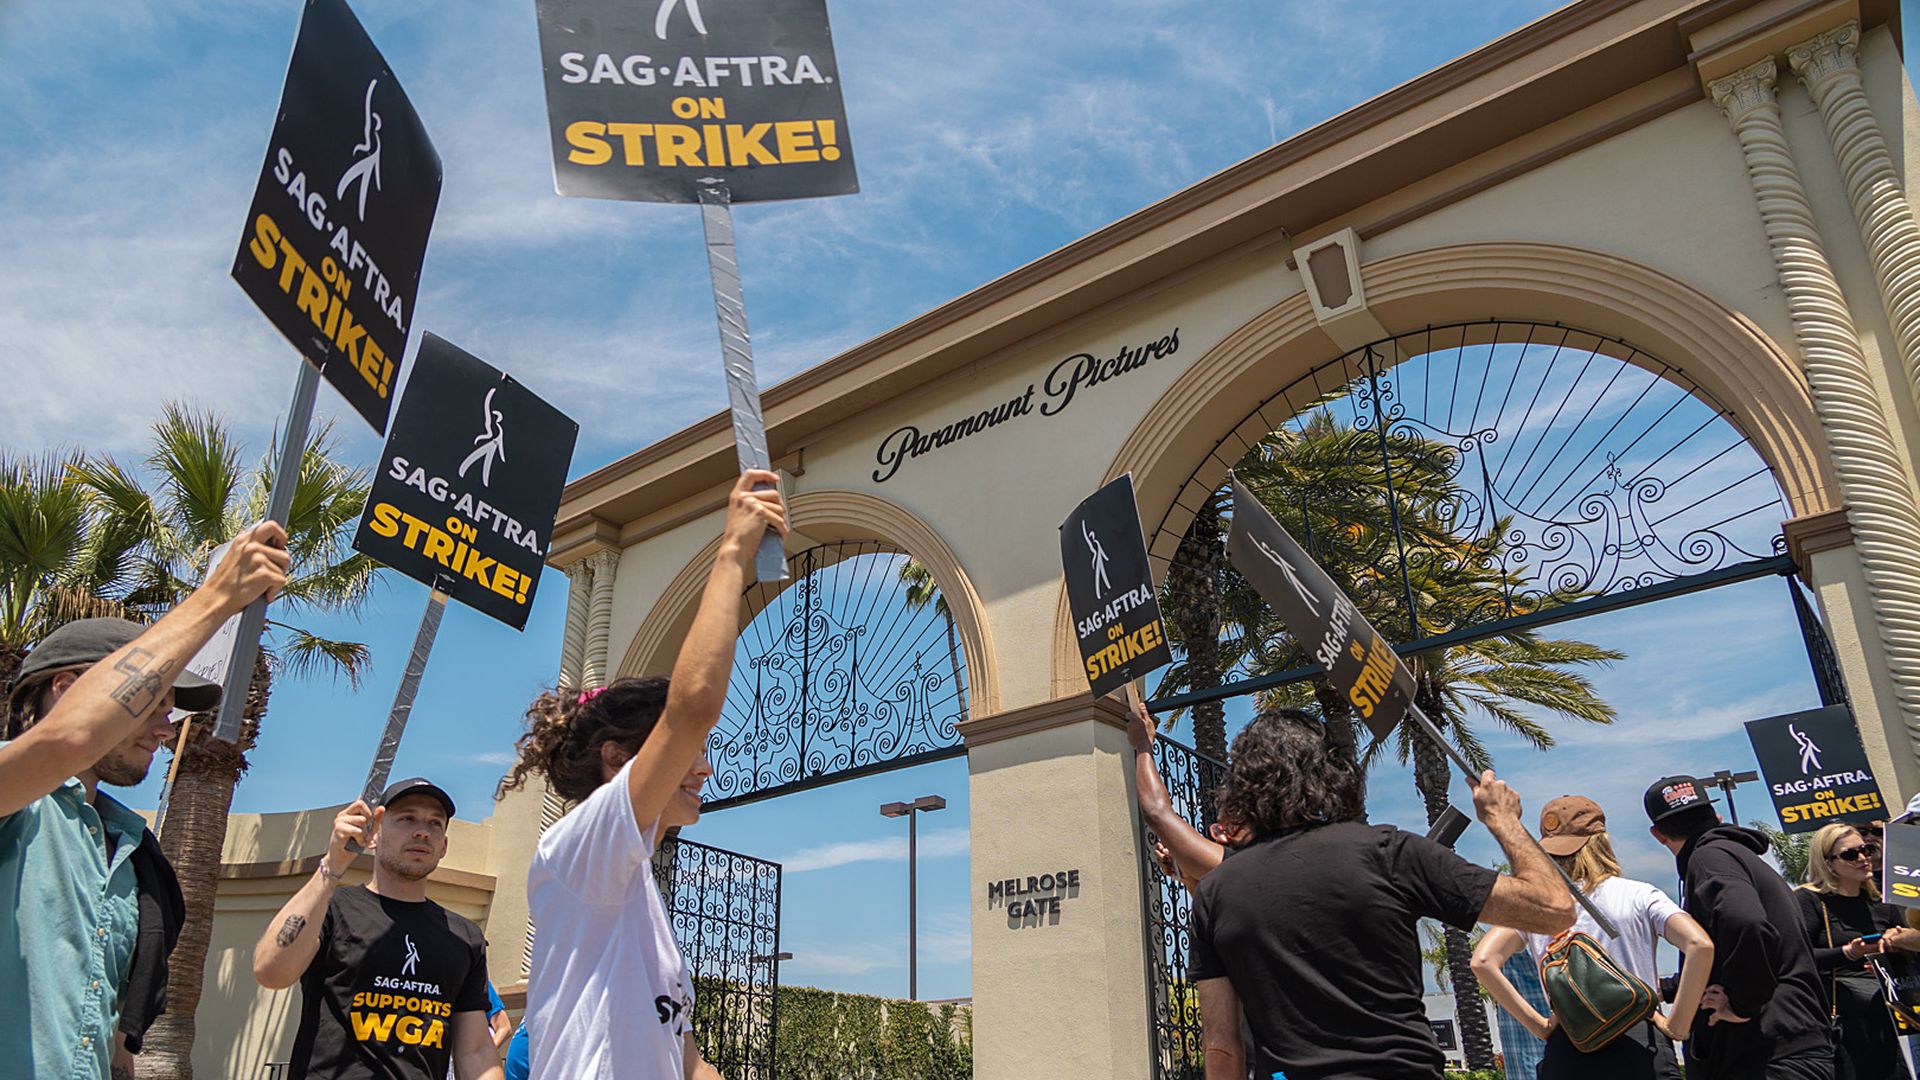  SAG-AFTRA strike in front of Paramount Pictures